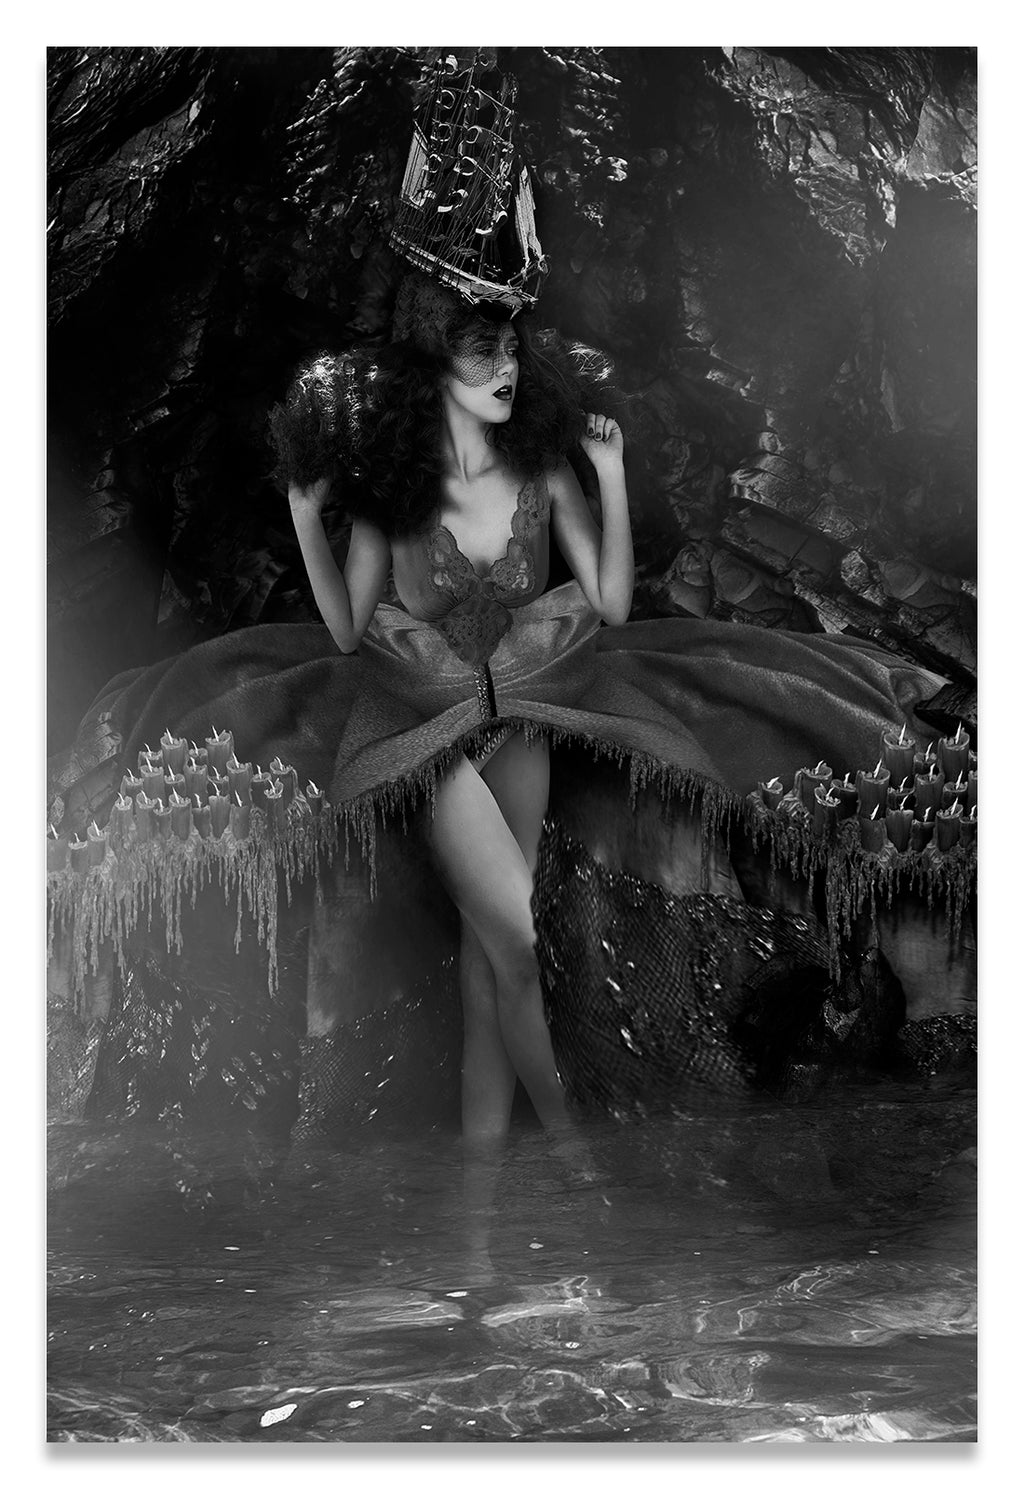 Vertical Black and White Portrait of a Woman Standing in Water in Purgatory; adorned with a Ship Hat and Melted Candles Along Her Dress.